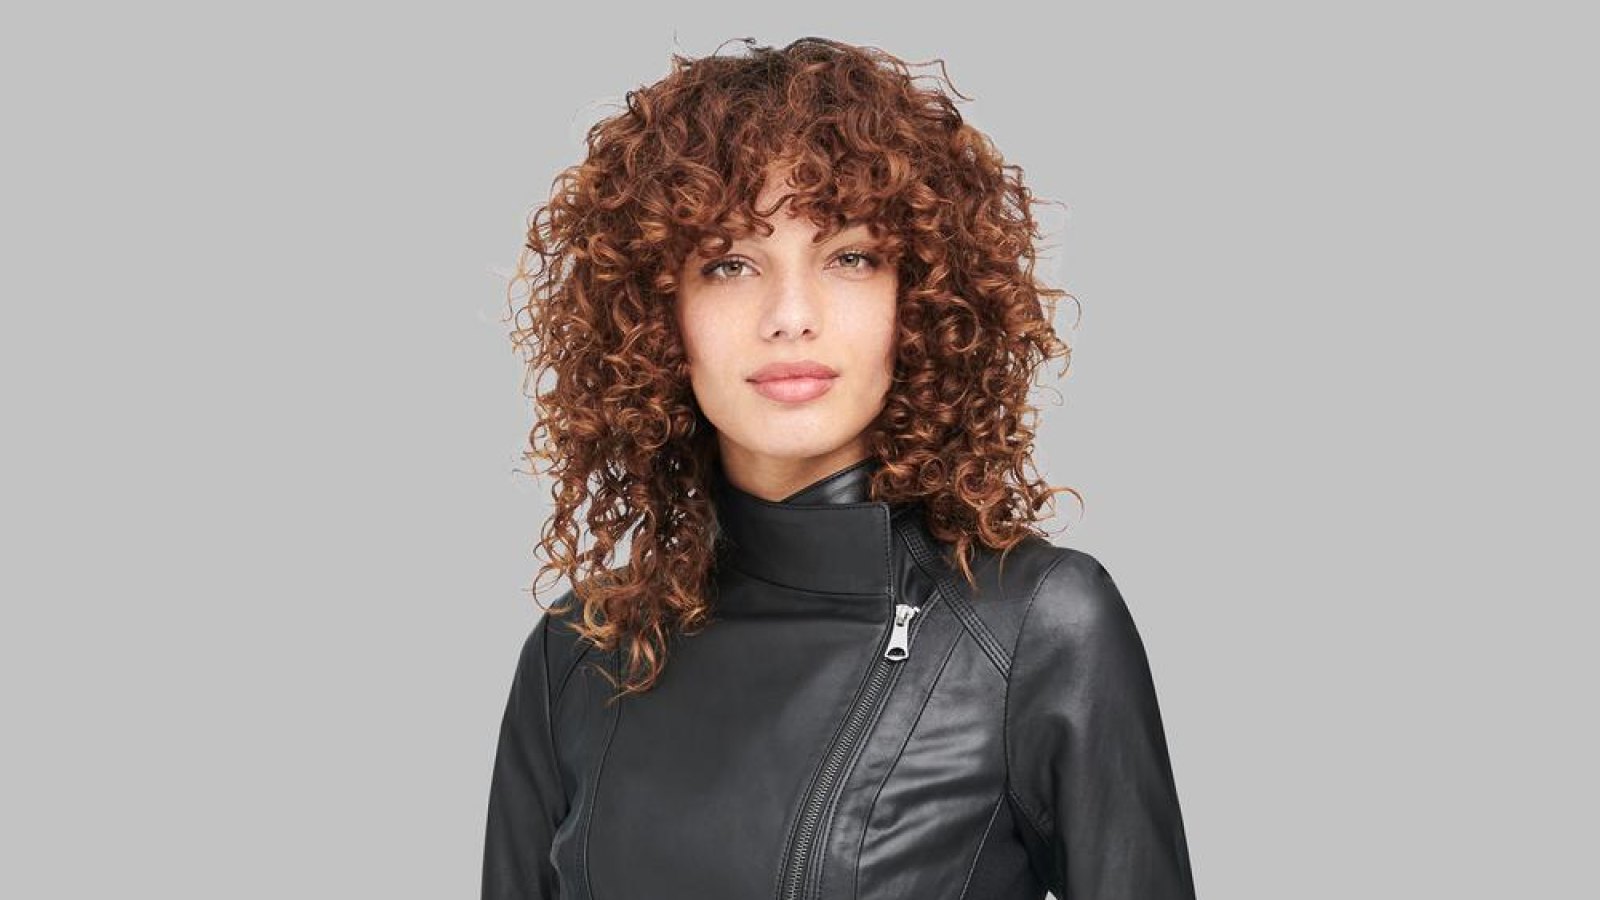 stretchy faux leather jacket